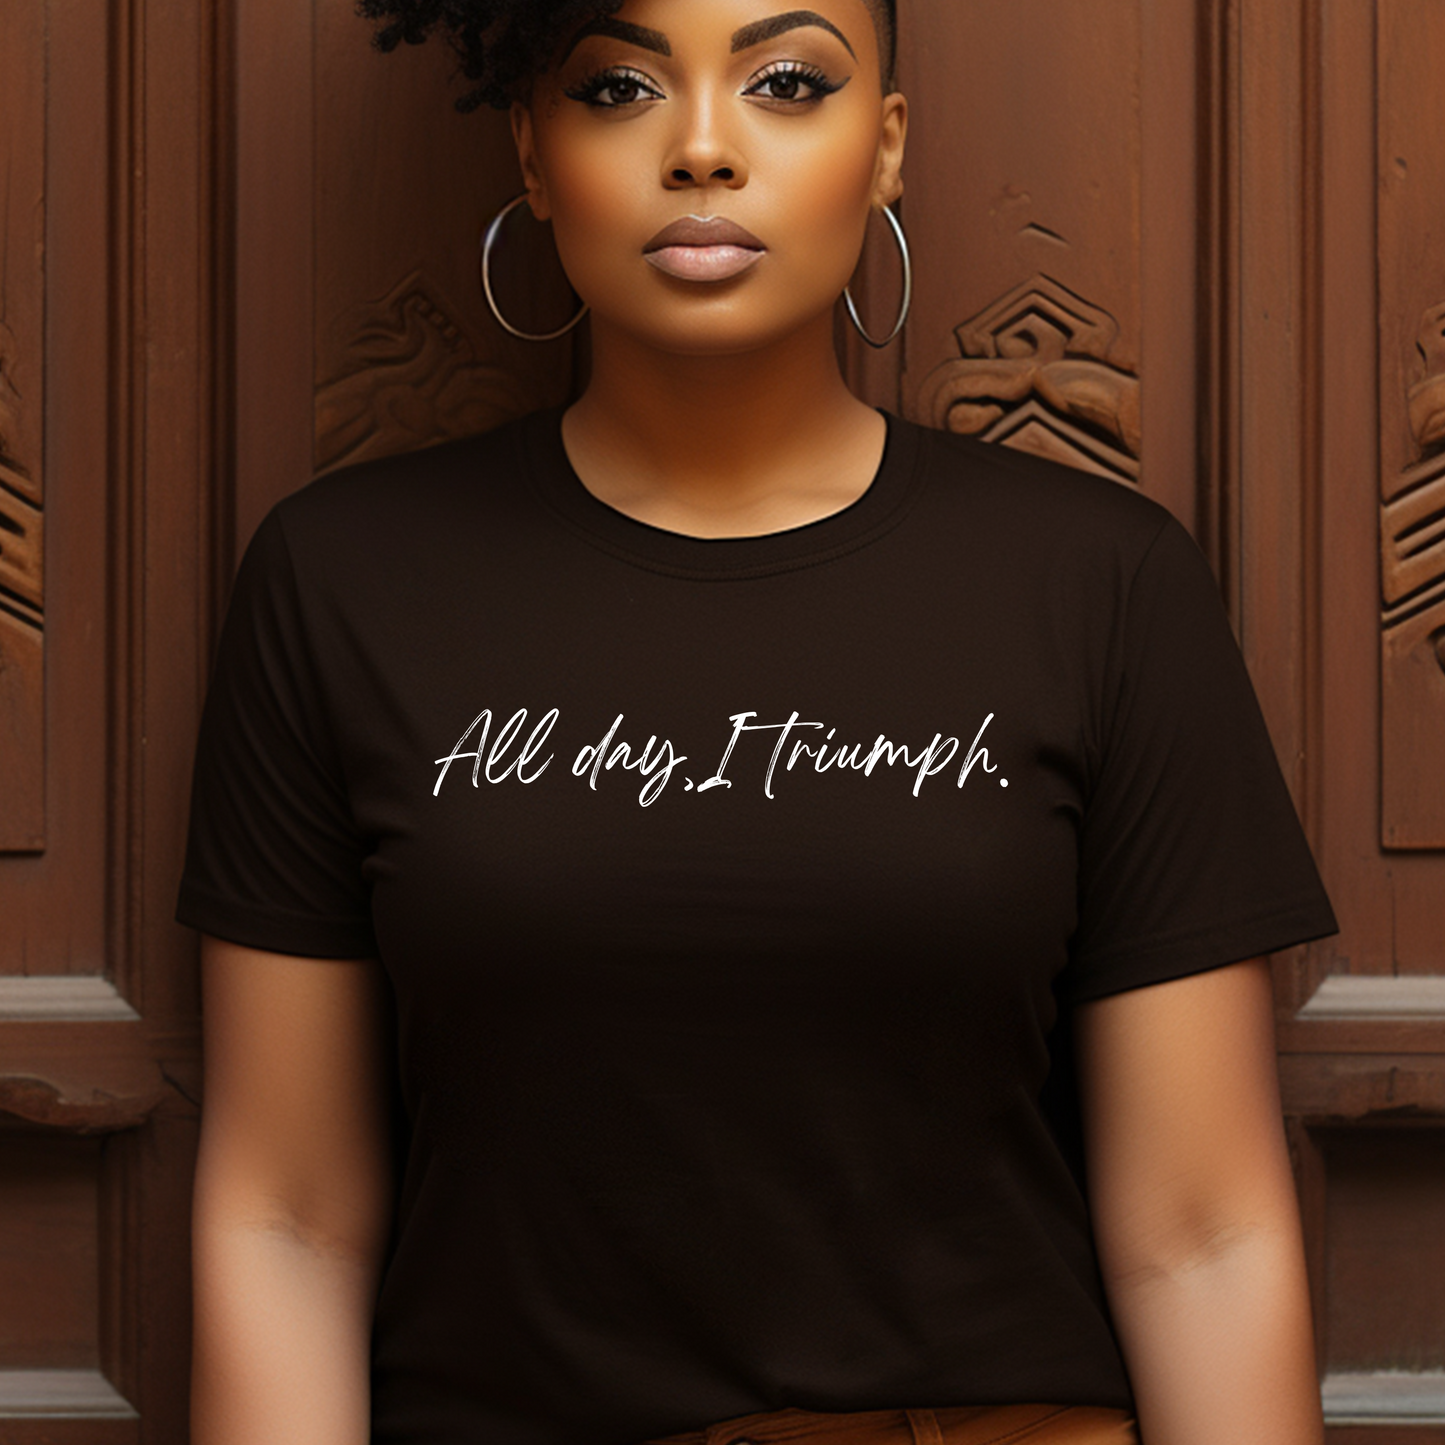 Stylish chocolate 'All Day I Triumph' t-shirt by Triumph Tees, designed to inspire courage and faith. Ideal faith apparel for believers empowered by God to overcome life's challenges.